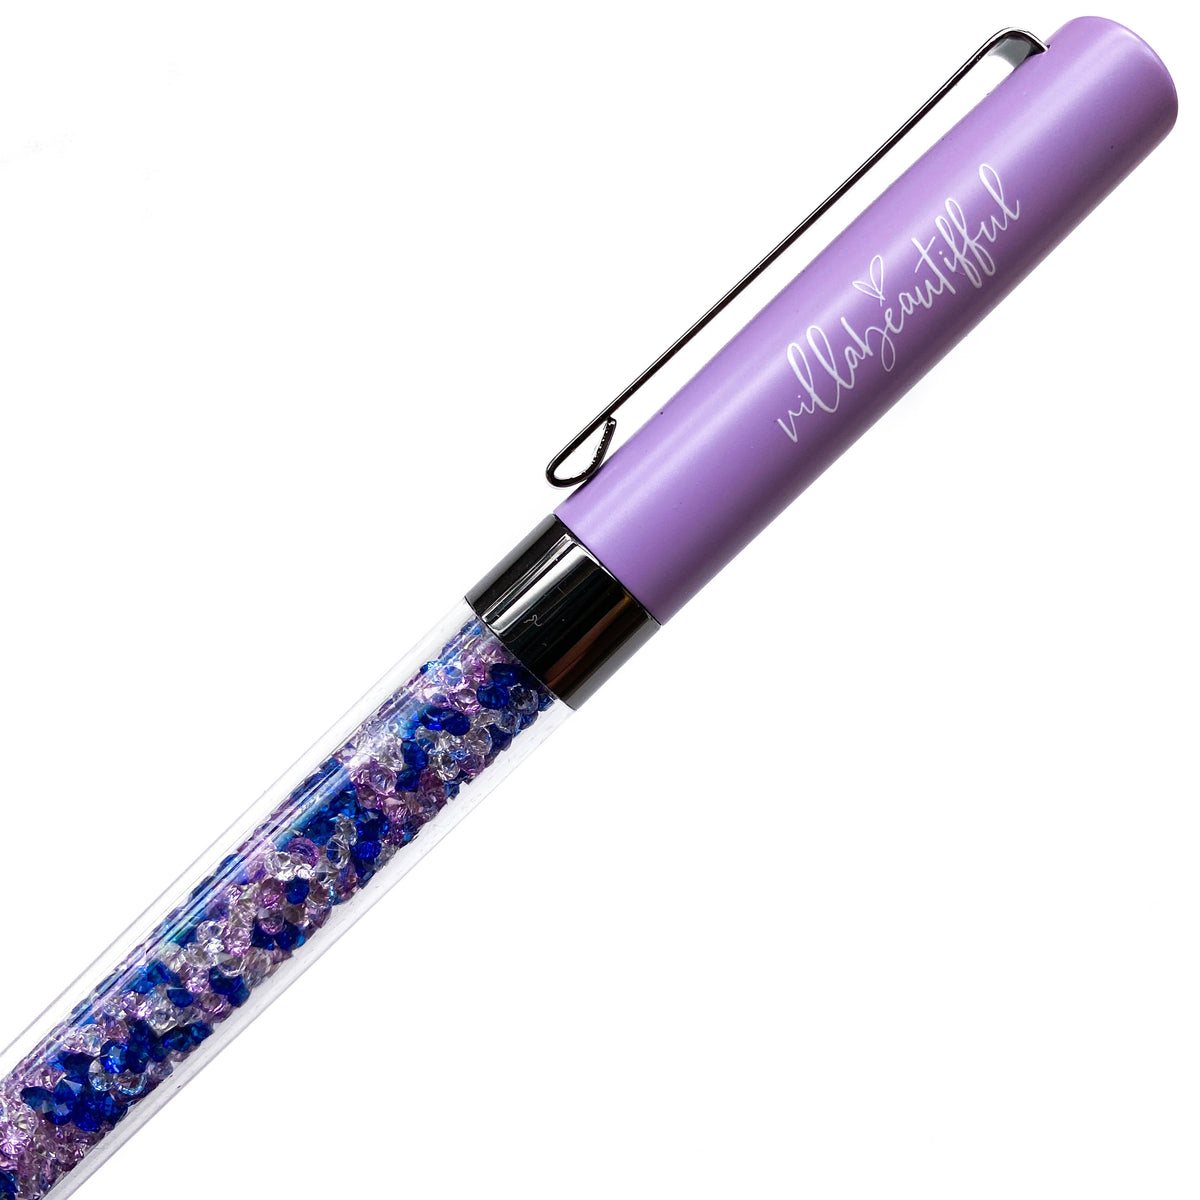 Wisteria Crystal VBPen | limited pen